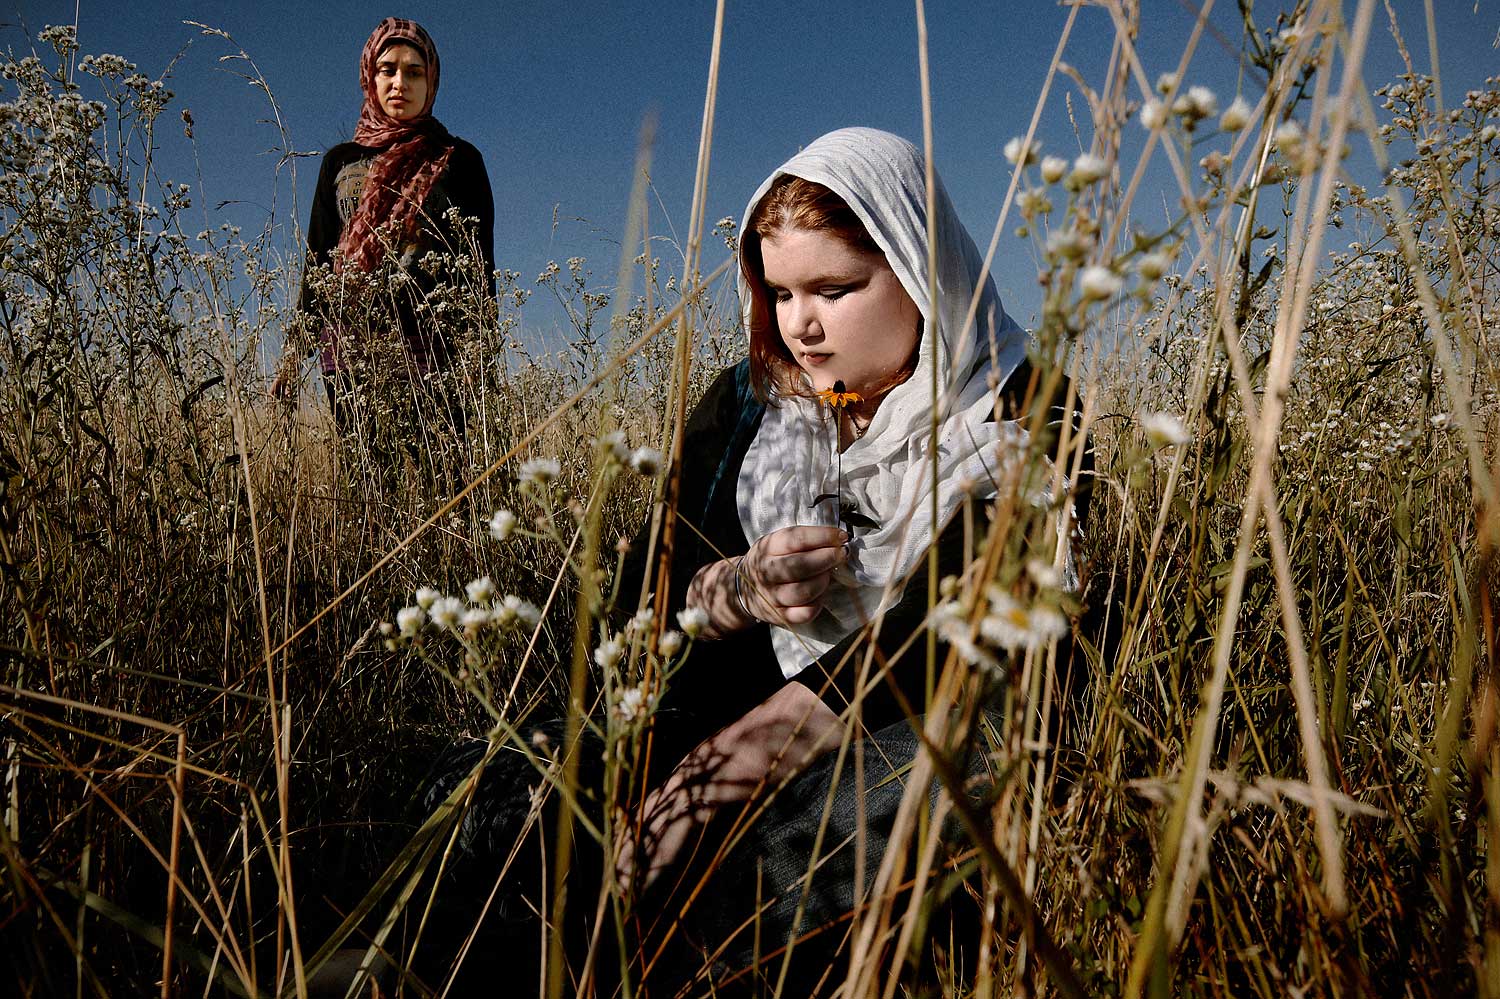 Caitlyn Green, right, in a field outside Columbia, Mo., July 2, 2010. Green lives in a rural town and converted to Islam more than a year ago, but her Catholic family does not accept the decision.